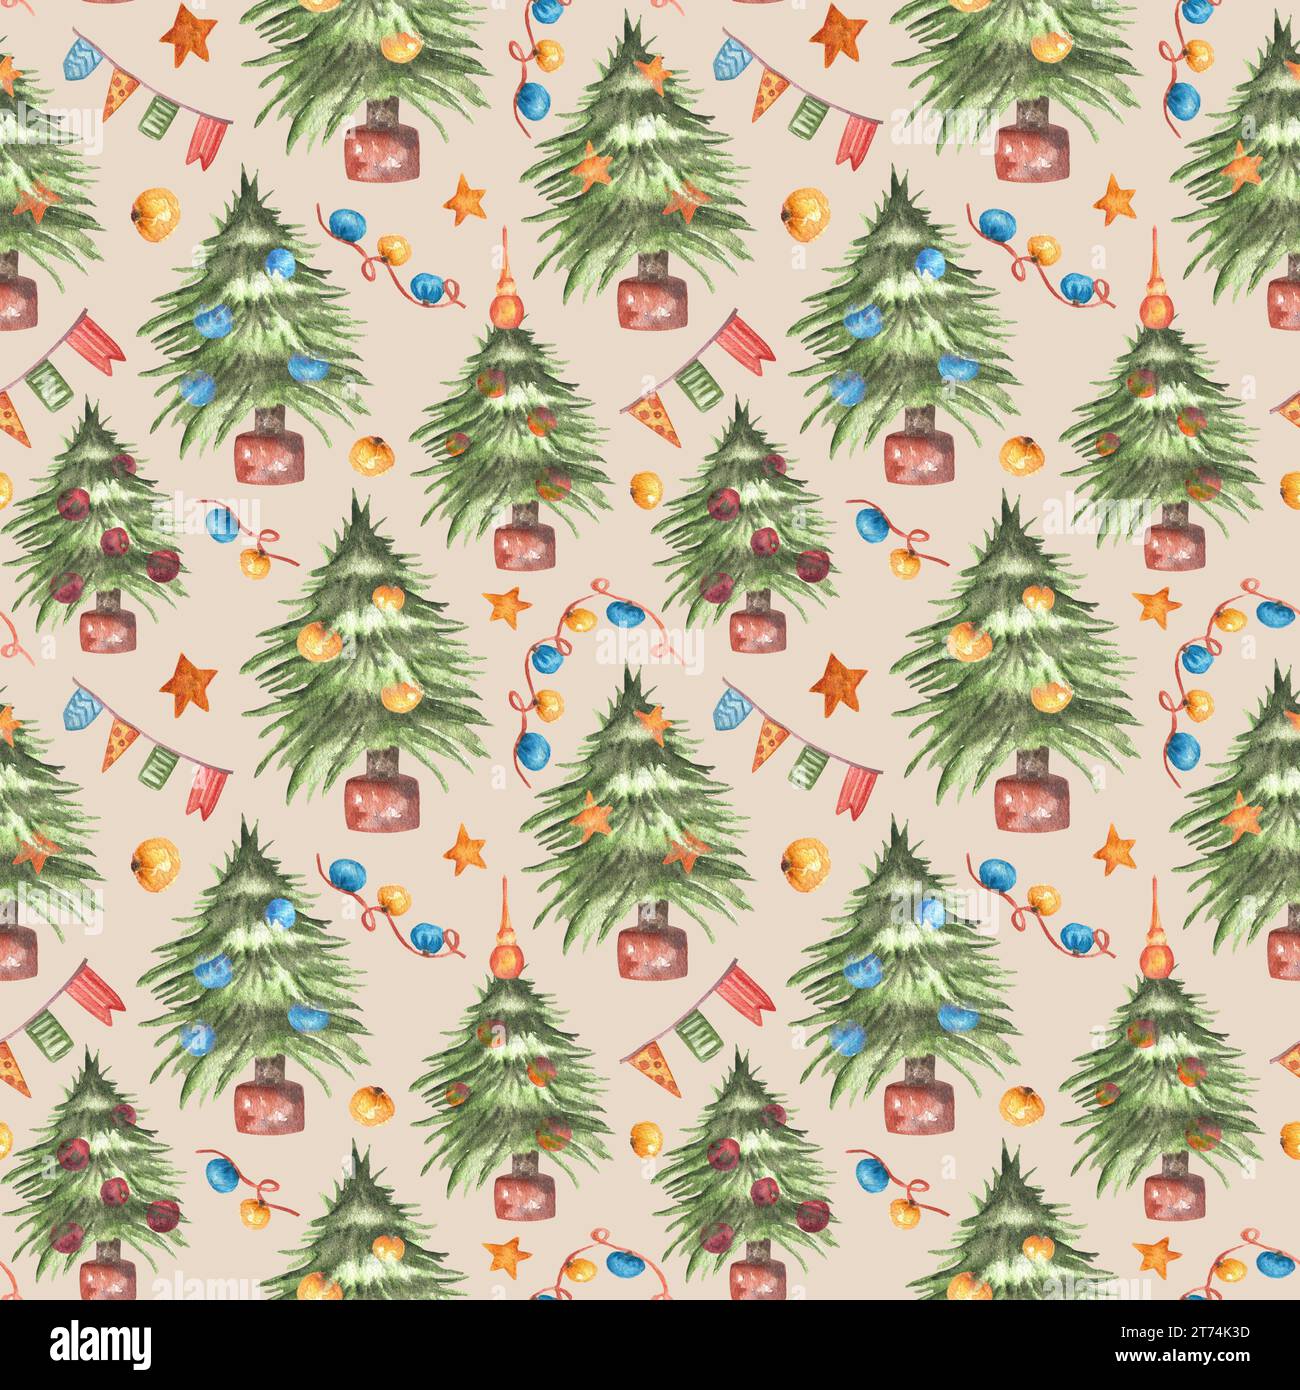 Illustrated Christmas Trees and Ornaments on Beige Wrapping Paper | Zazzle